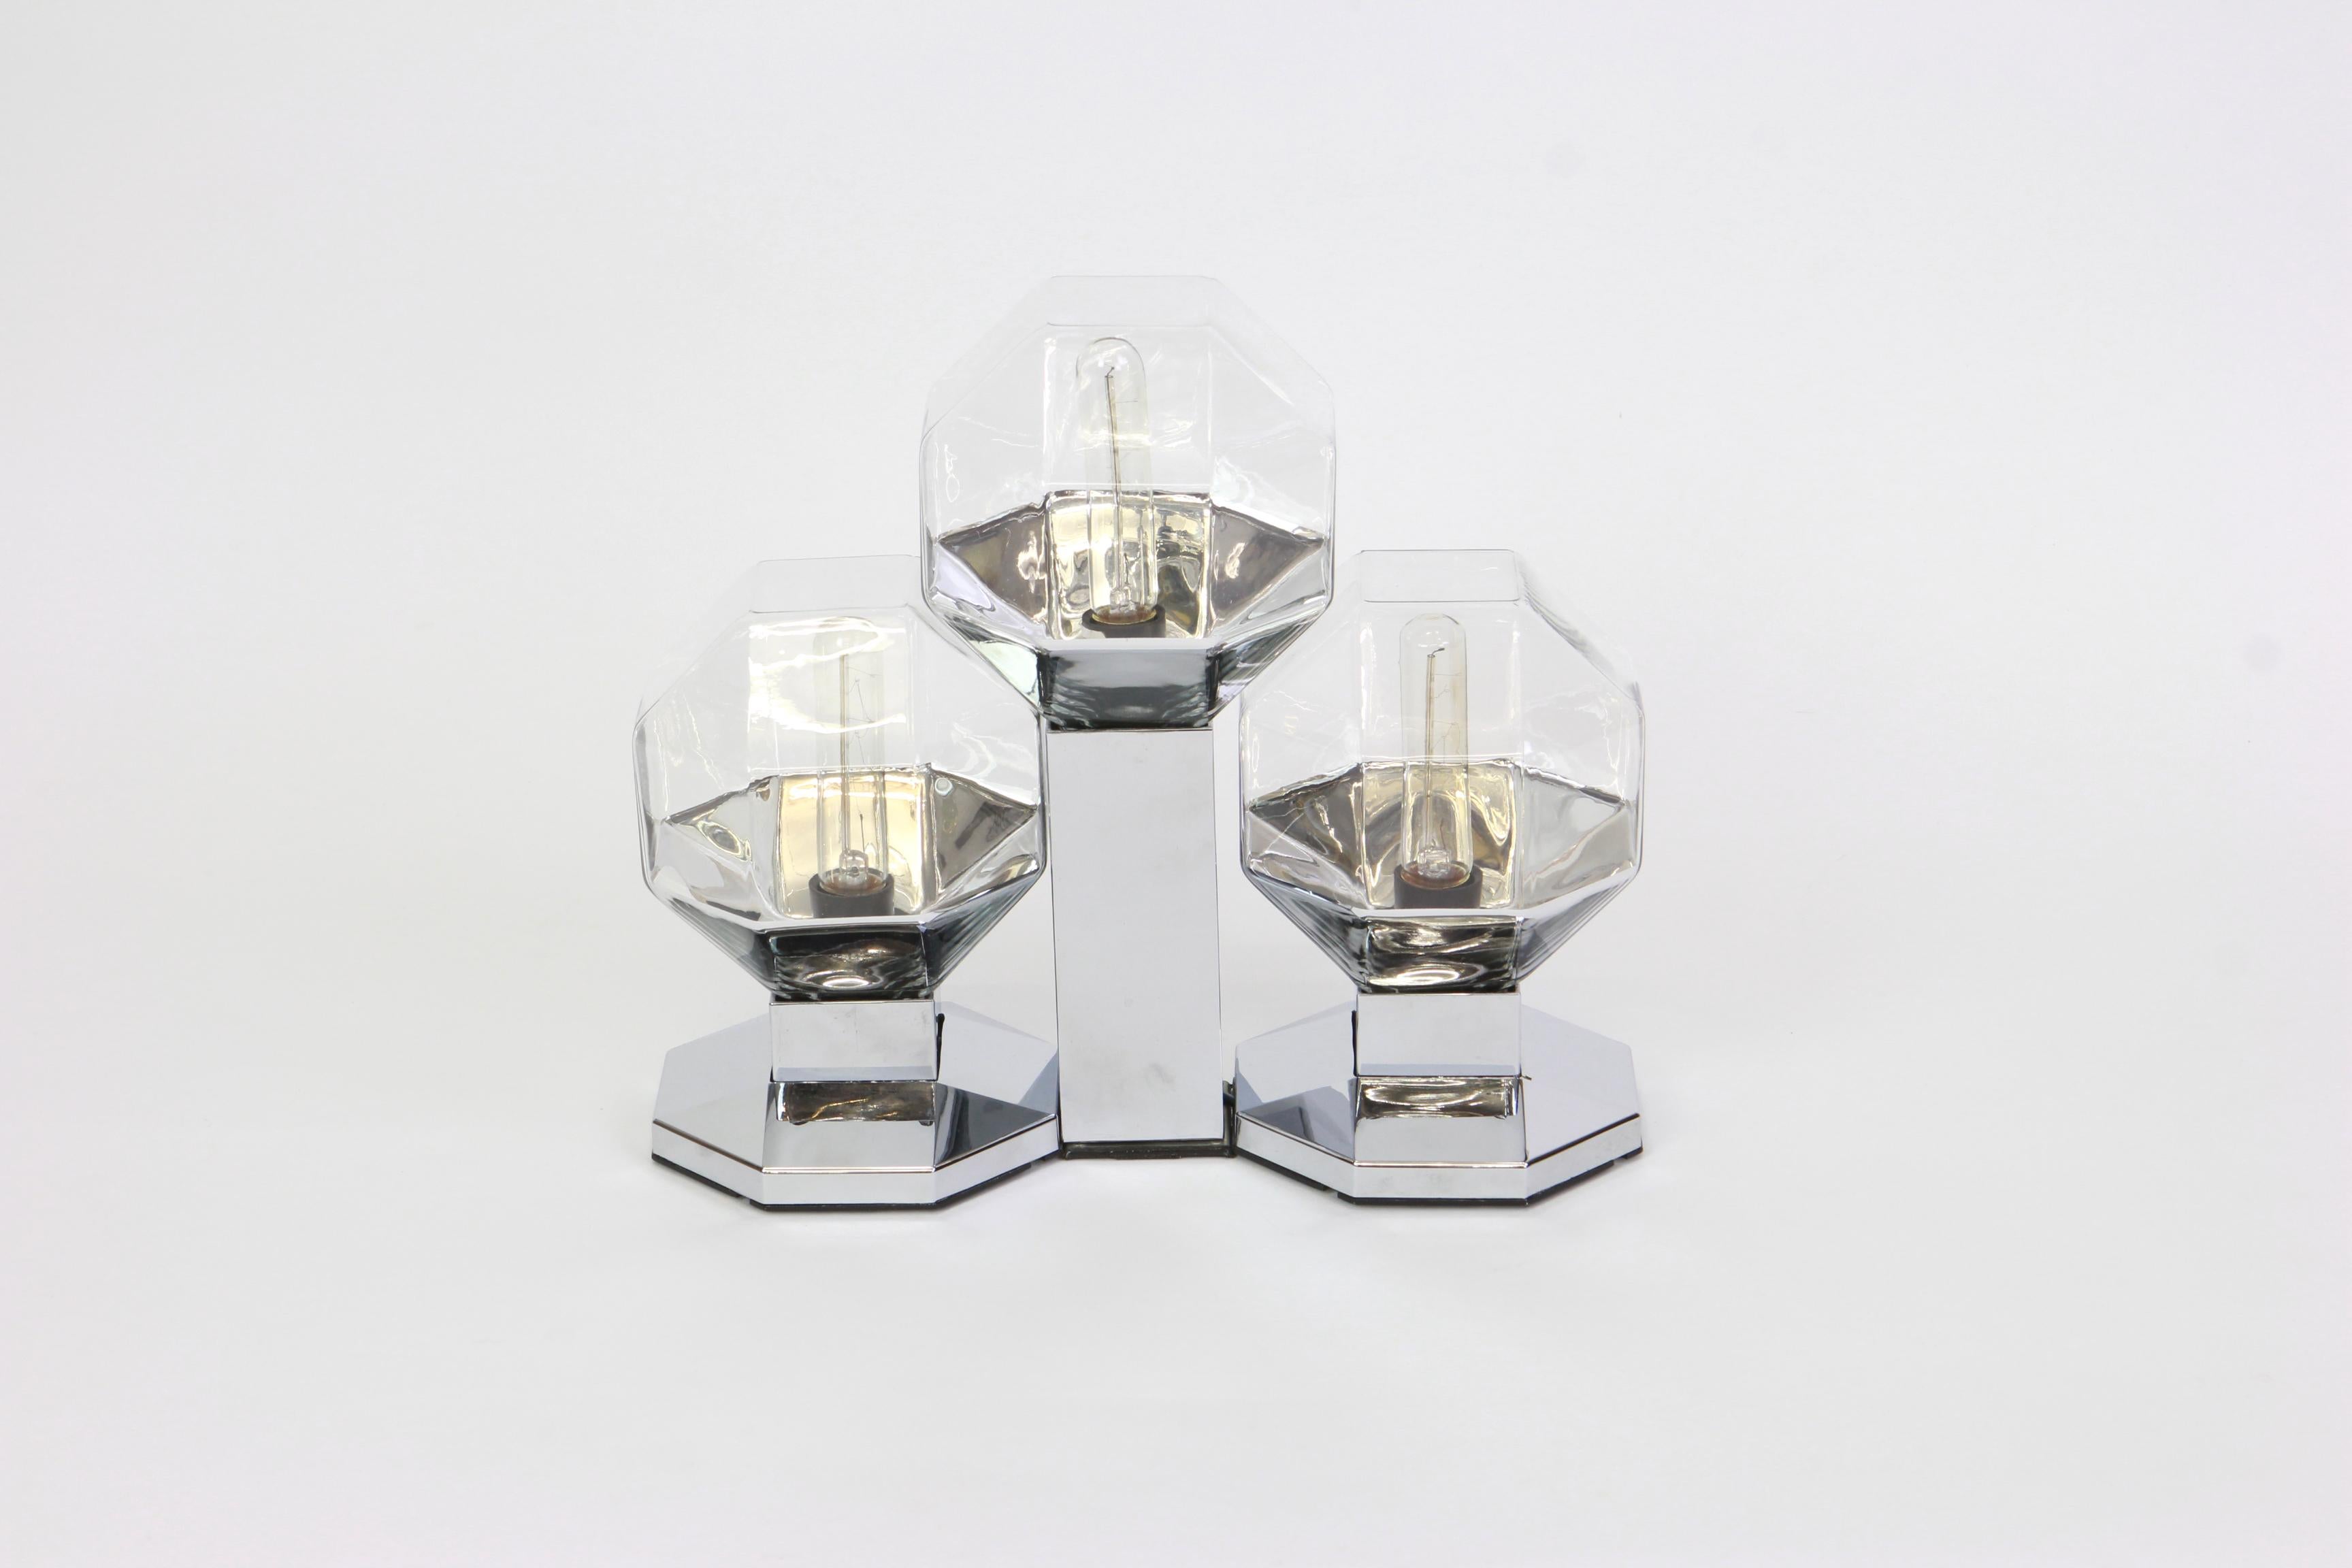 Glass Pair of Two Wall Sconces by Motoko Ishii for Staff, Germany, 1970s For Sale